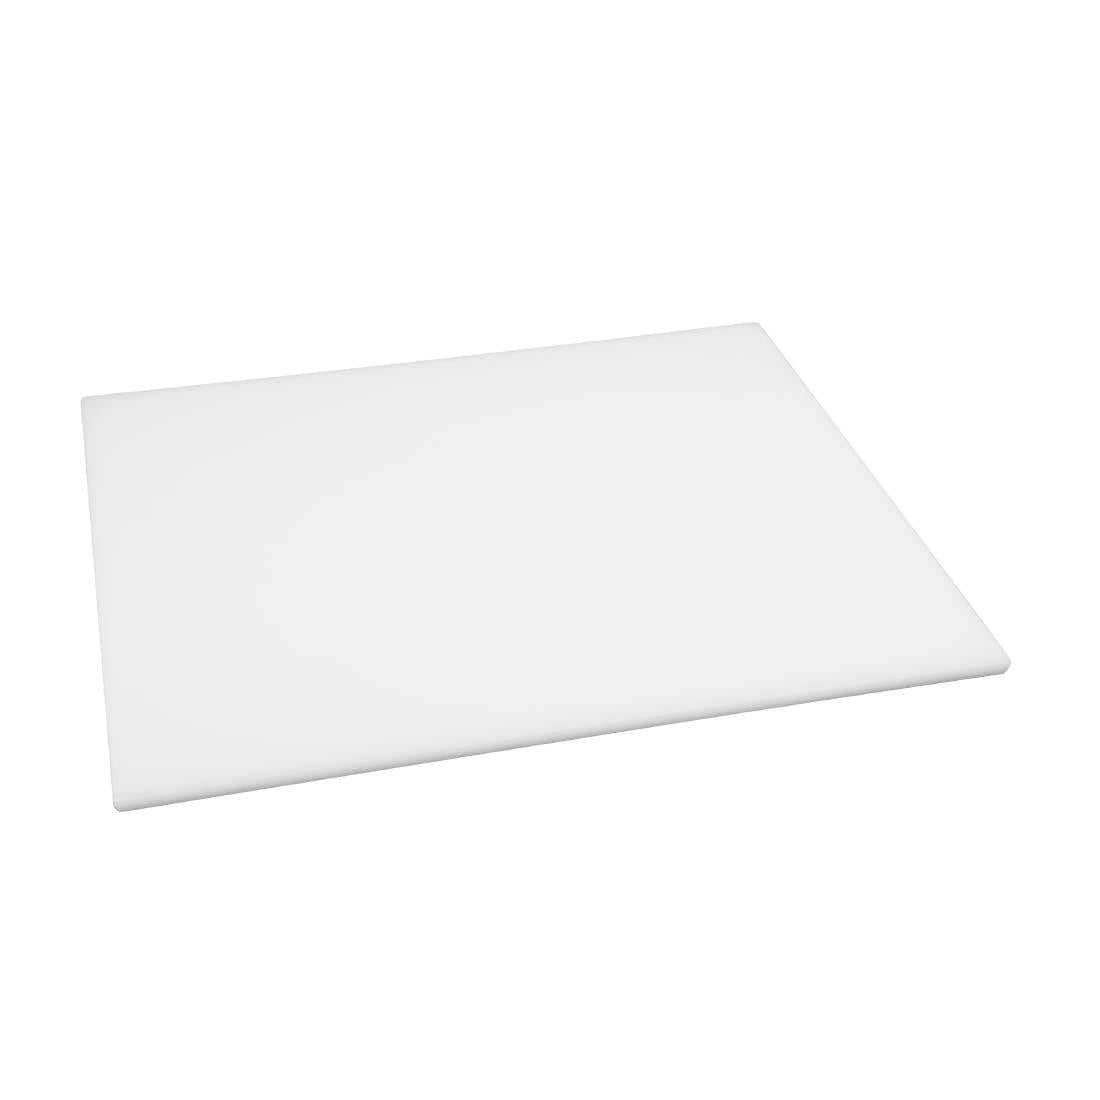 GH795 Hygiplas Low Density White Chopping Board Small JD Catering Equipment Solutions Ltd